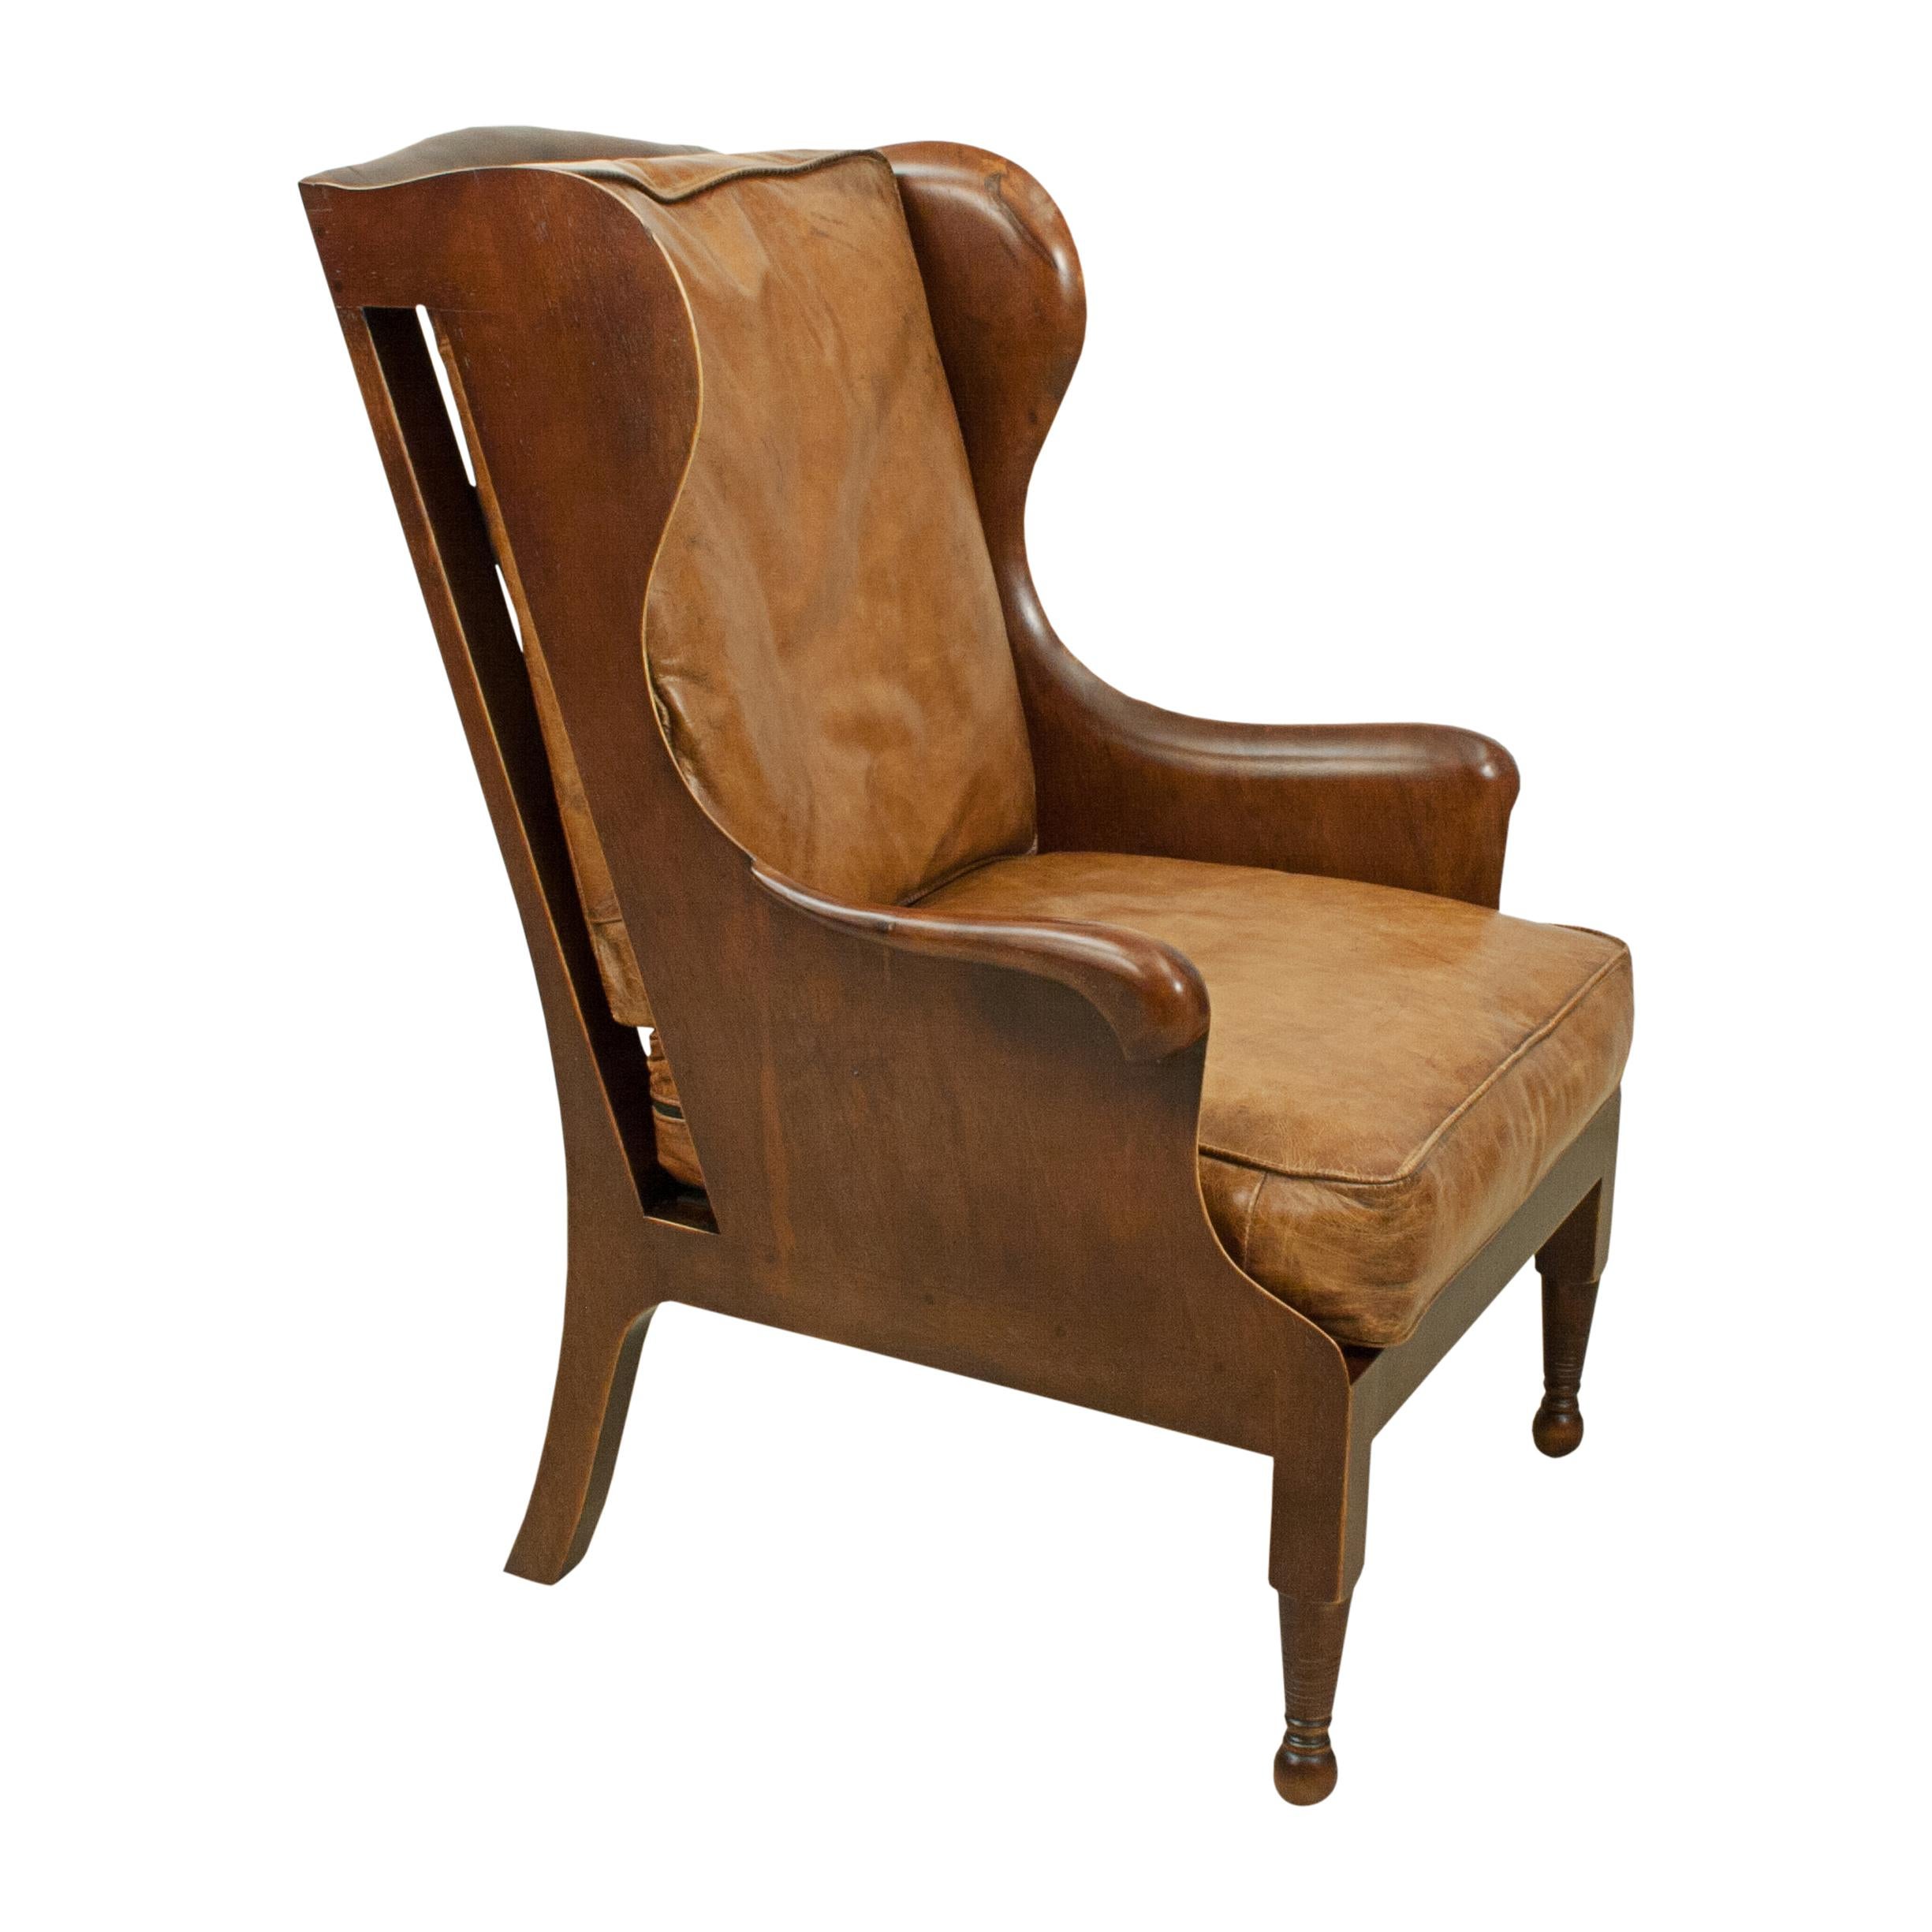 Mahogany wing armchair with leather seat and back.
A very nice well proportioned high back wing armchair made of mahogany with tan leather seat and back cushion. The chair is raised on turned front mahogany legs with square legs to the rear and a